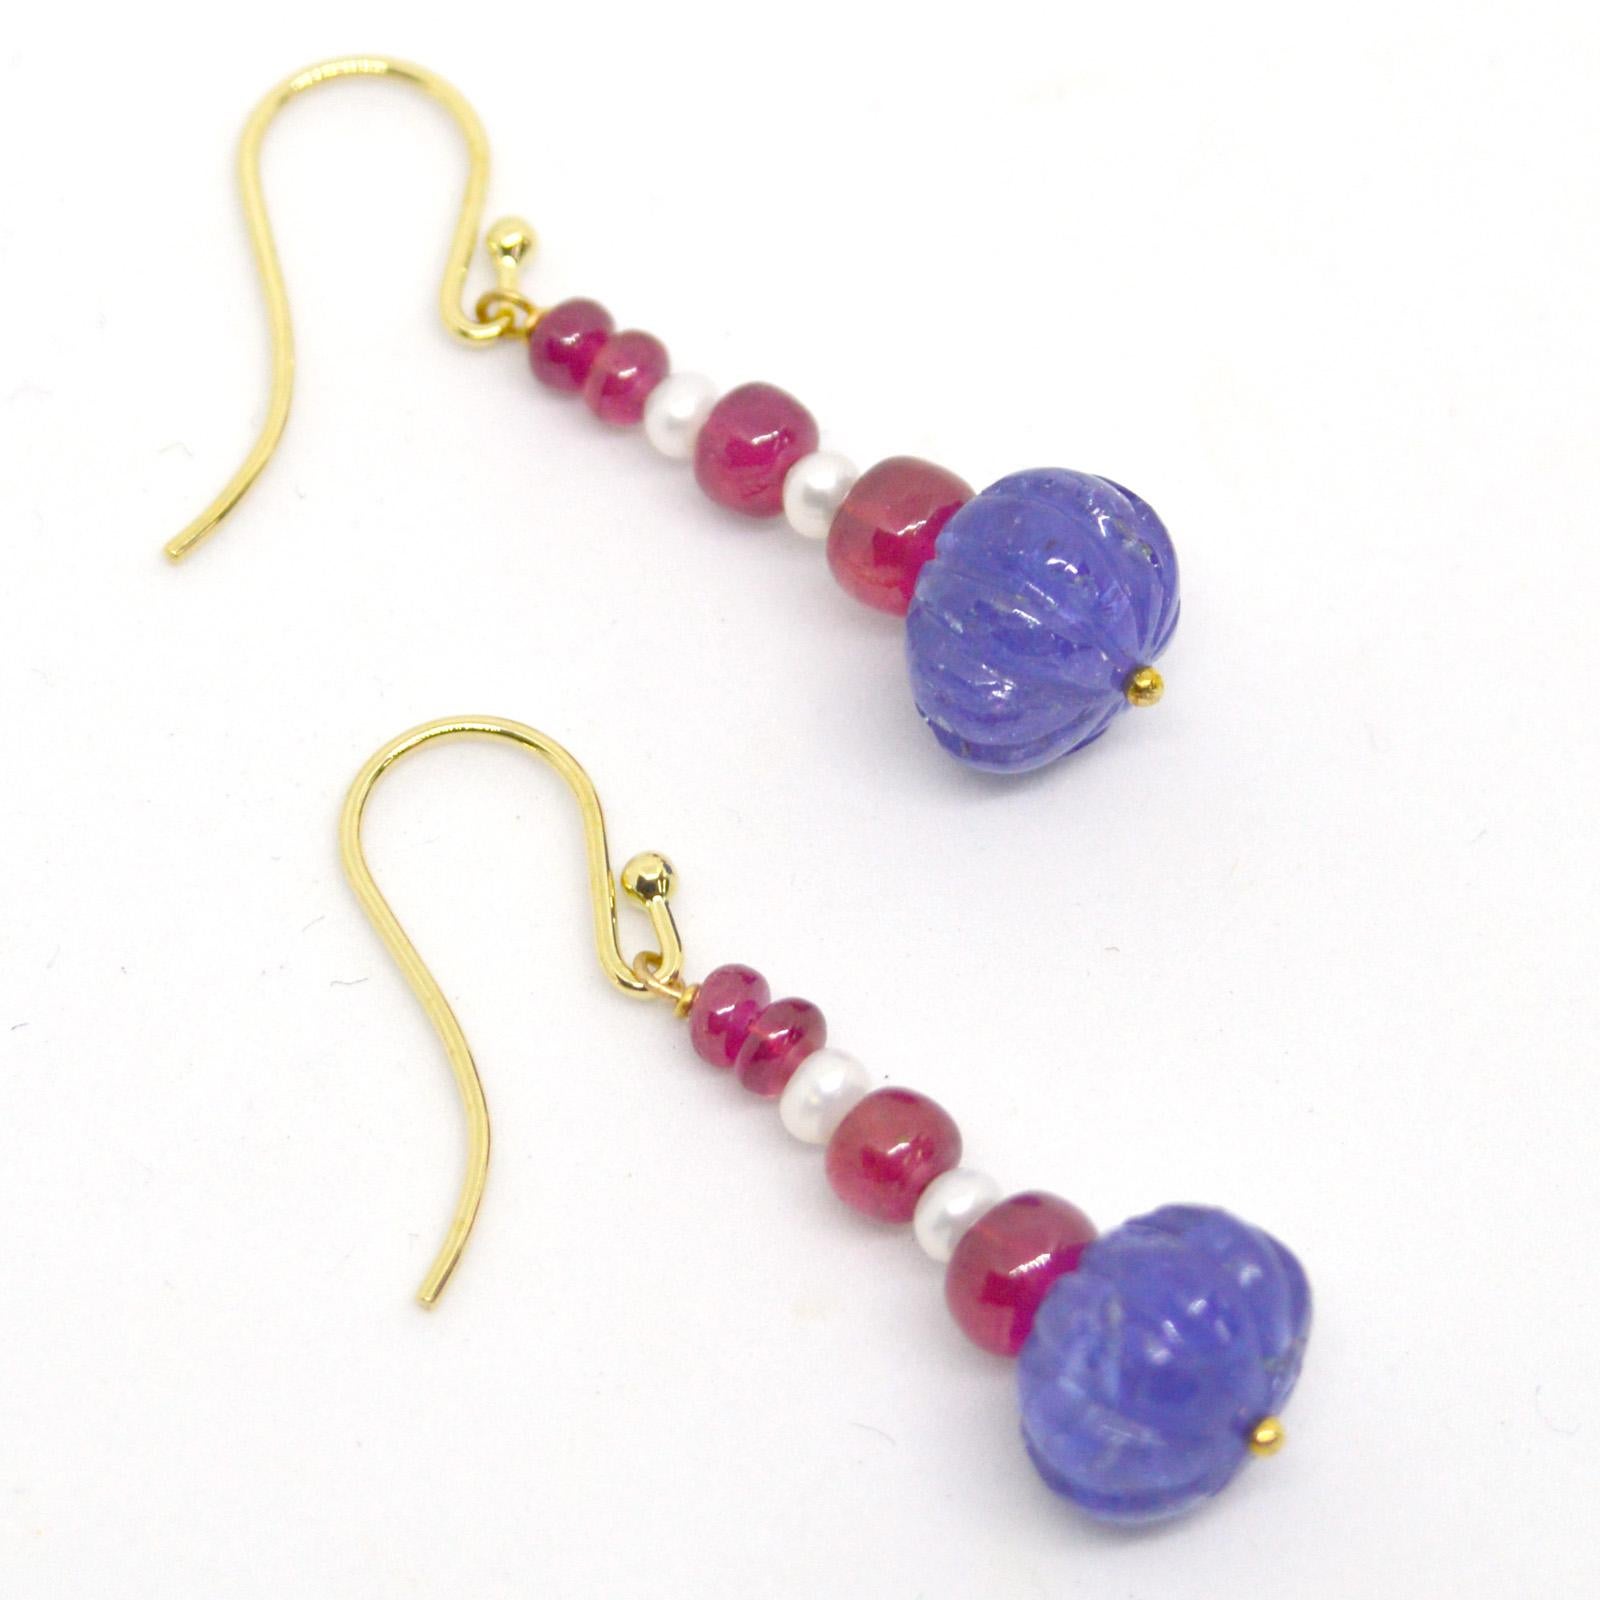 Carved Tanzanite melon shaped beads 8x12mm with 3mm Fresh Water Pearls and 4 Polished rondels of Natural Burmese Rubies on each earring graduating from 5.6x4.8mm down on 9kt Gold sheppard and headpin
Finished Earrings measures 40mm  1.57 inches
